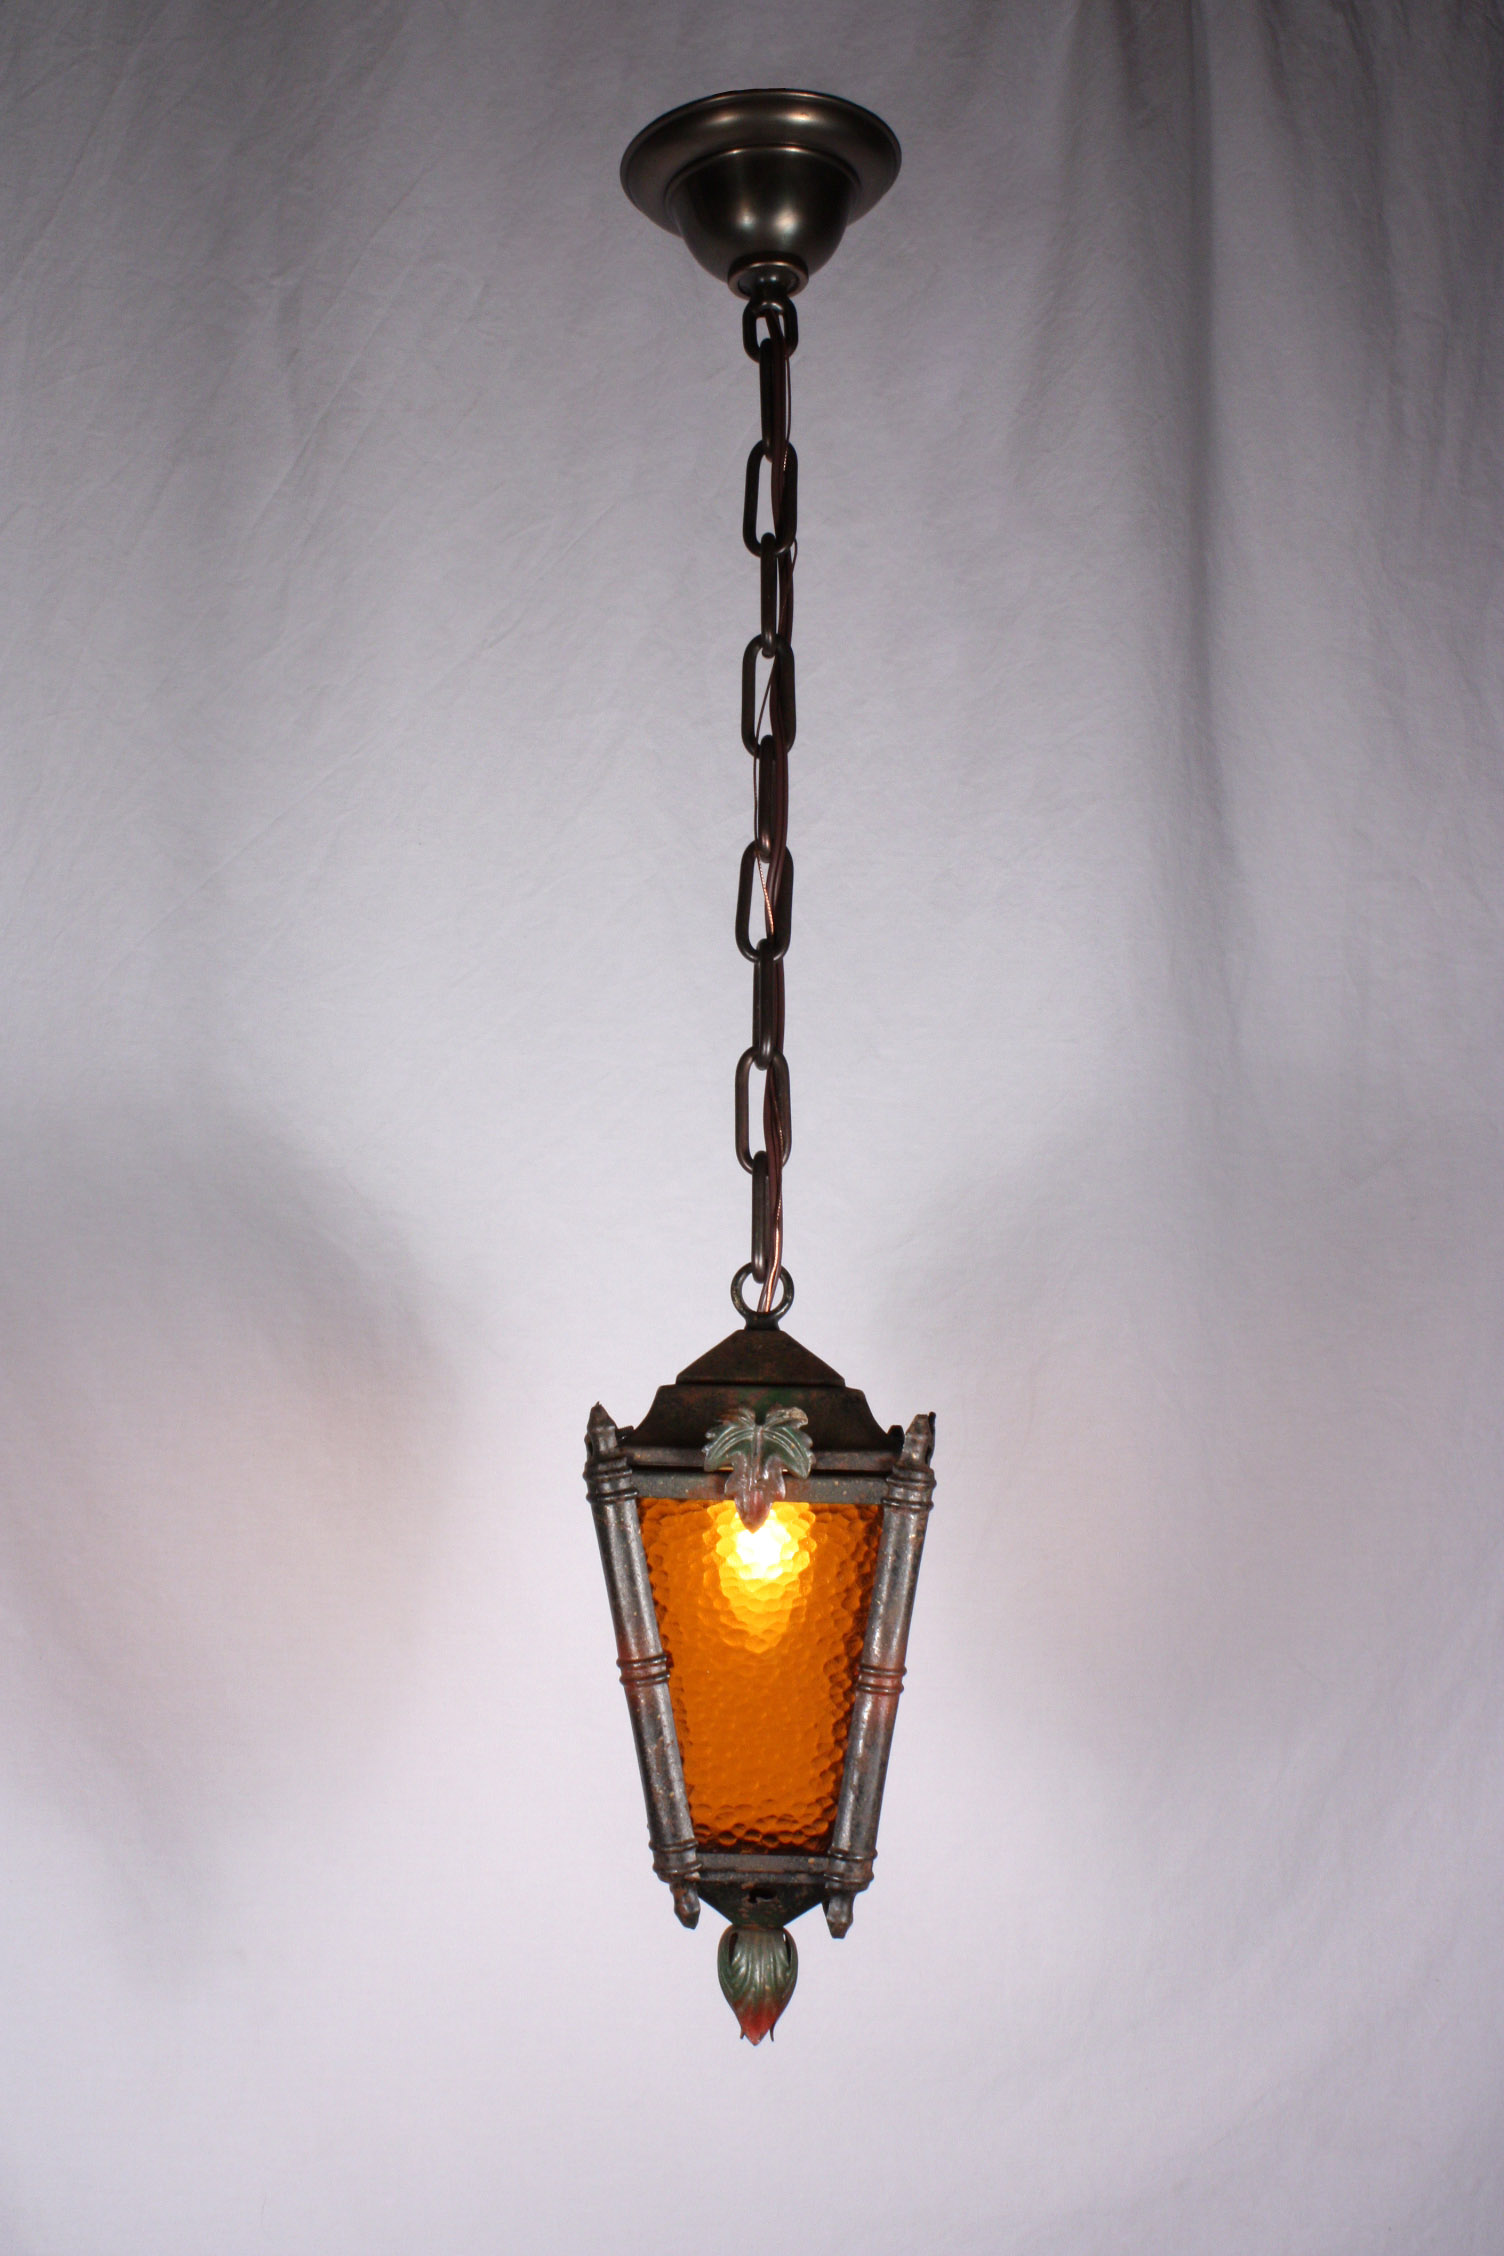 SOLD Delightful Antique Lantern with Maple Leaves, Original Polychrome Finish, c. 1920’s-21011